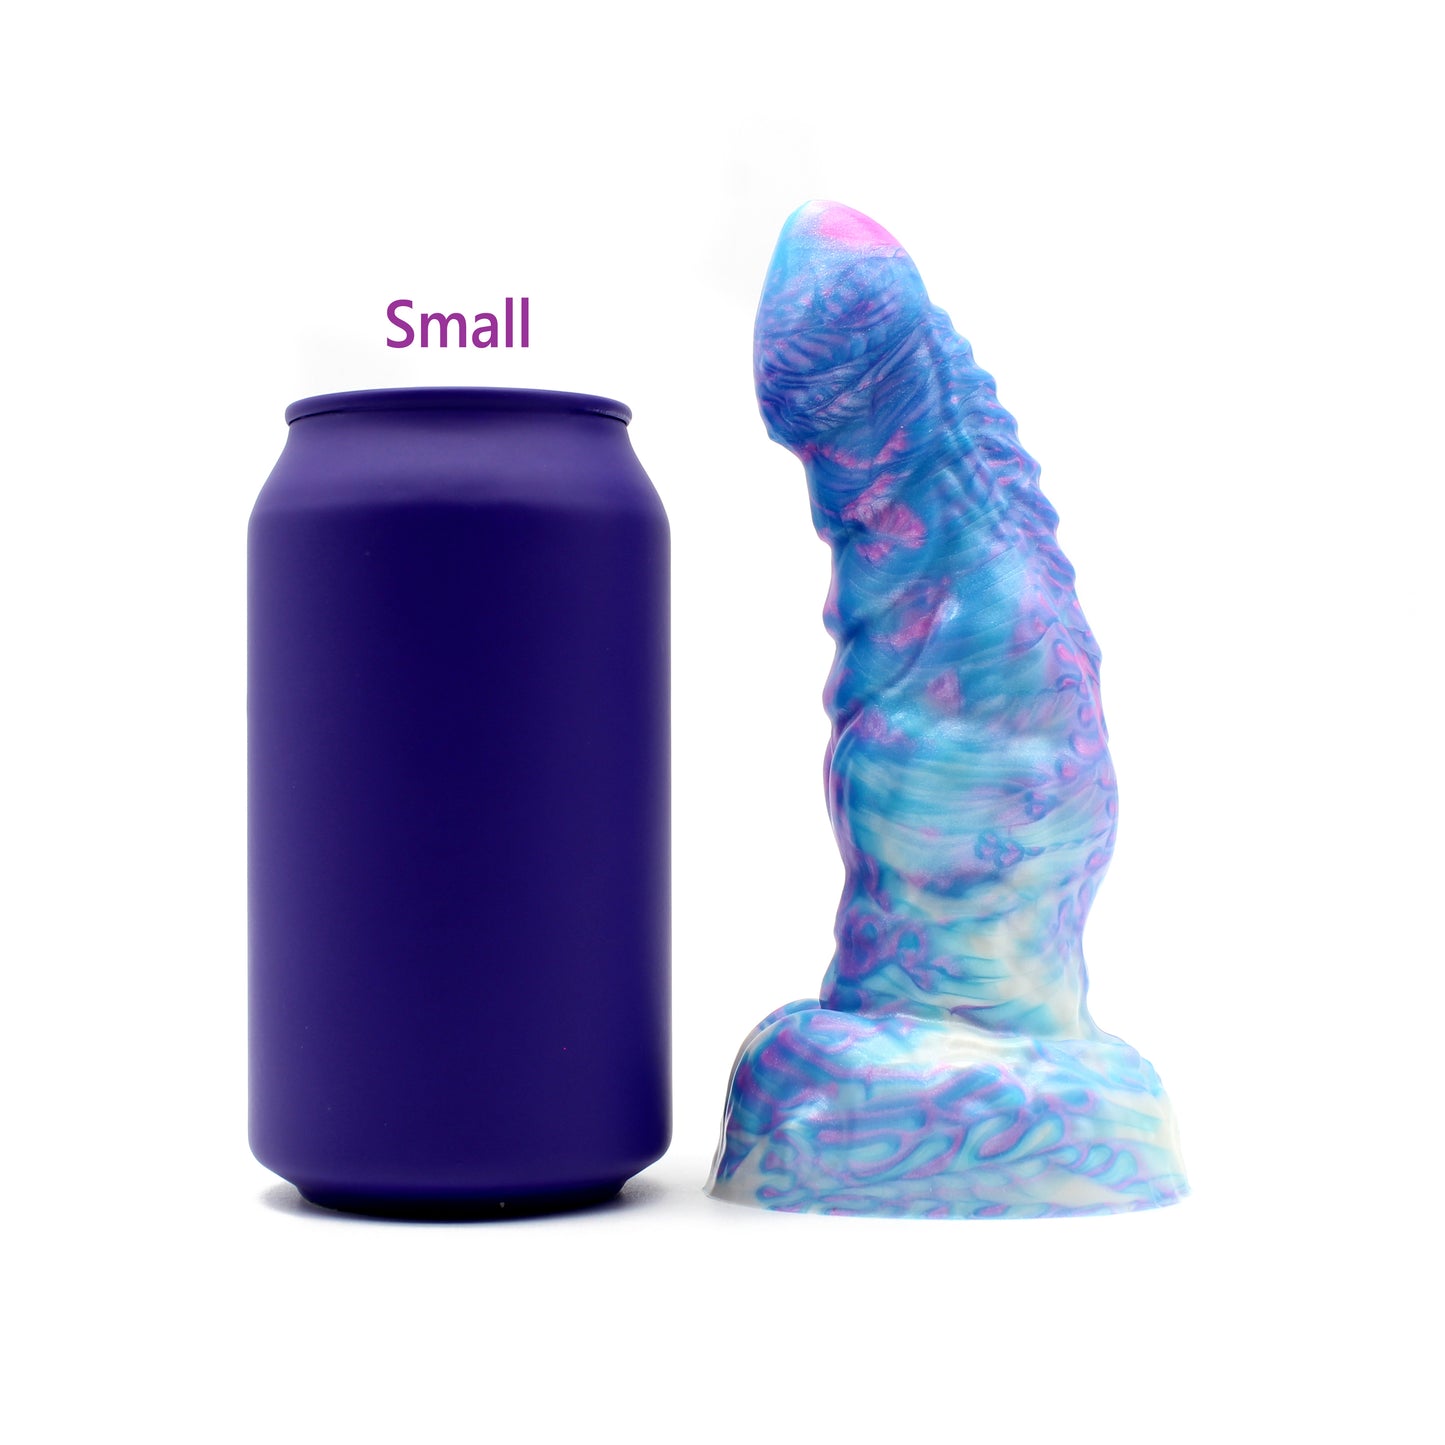 The Ardor Dragon Dildo of Lust and Love - Ready-made